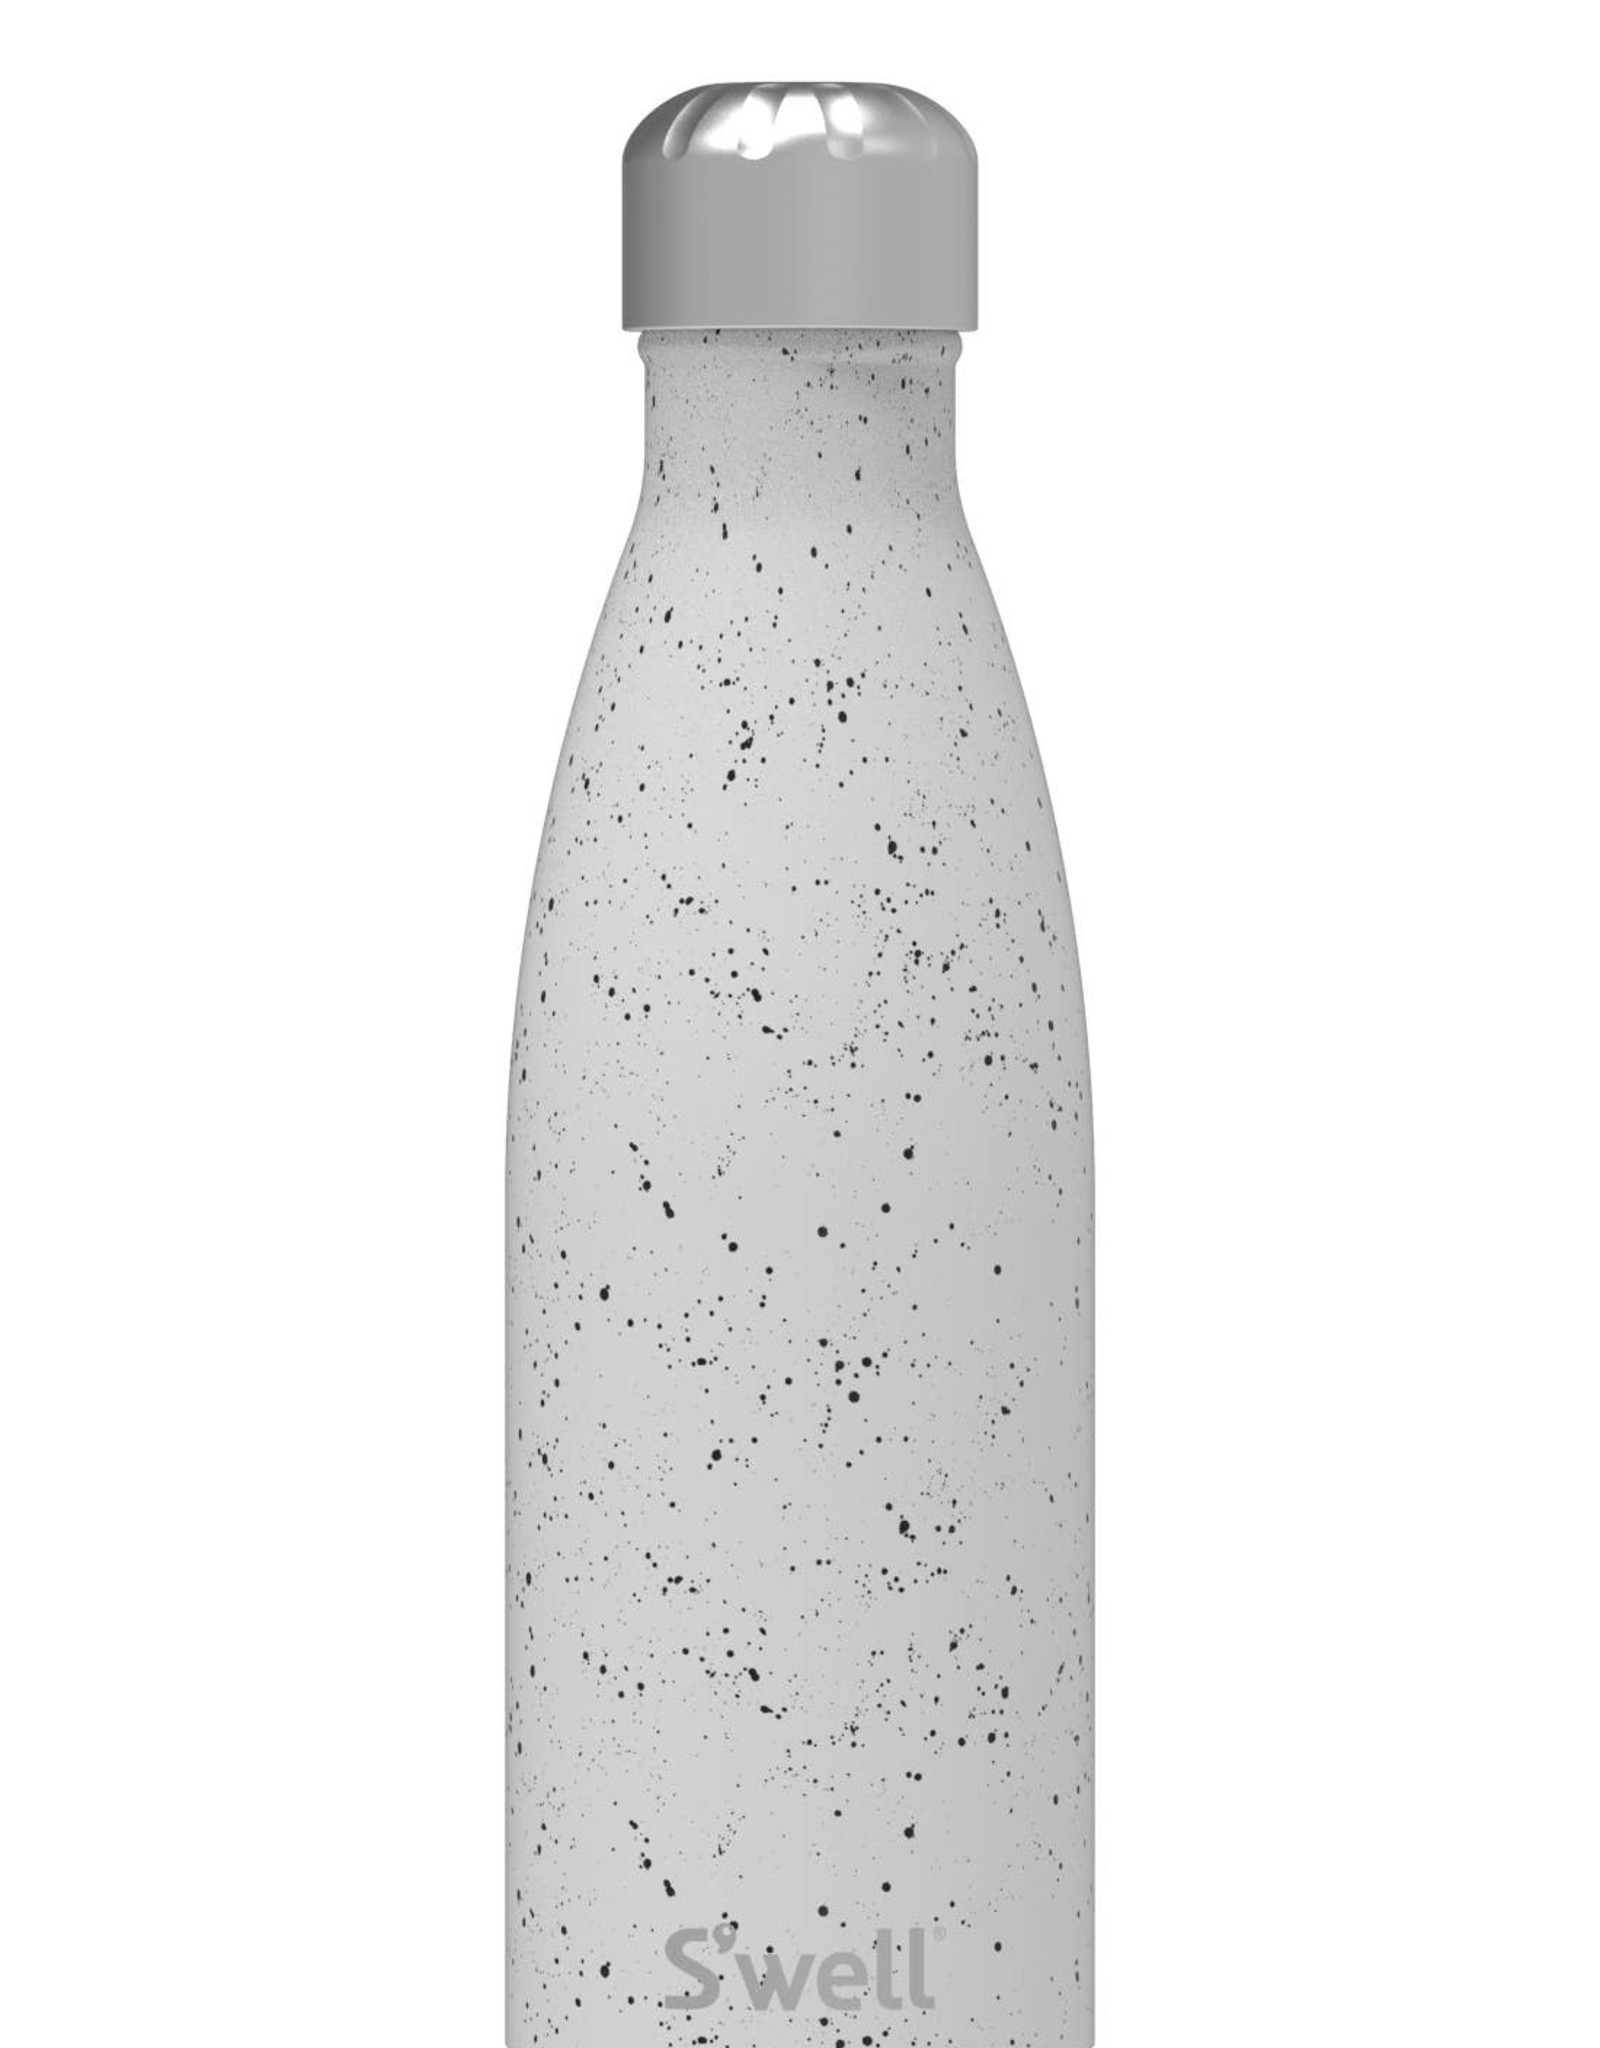 S'well Bottle - Speckled Moon 17oz - Dog Dish